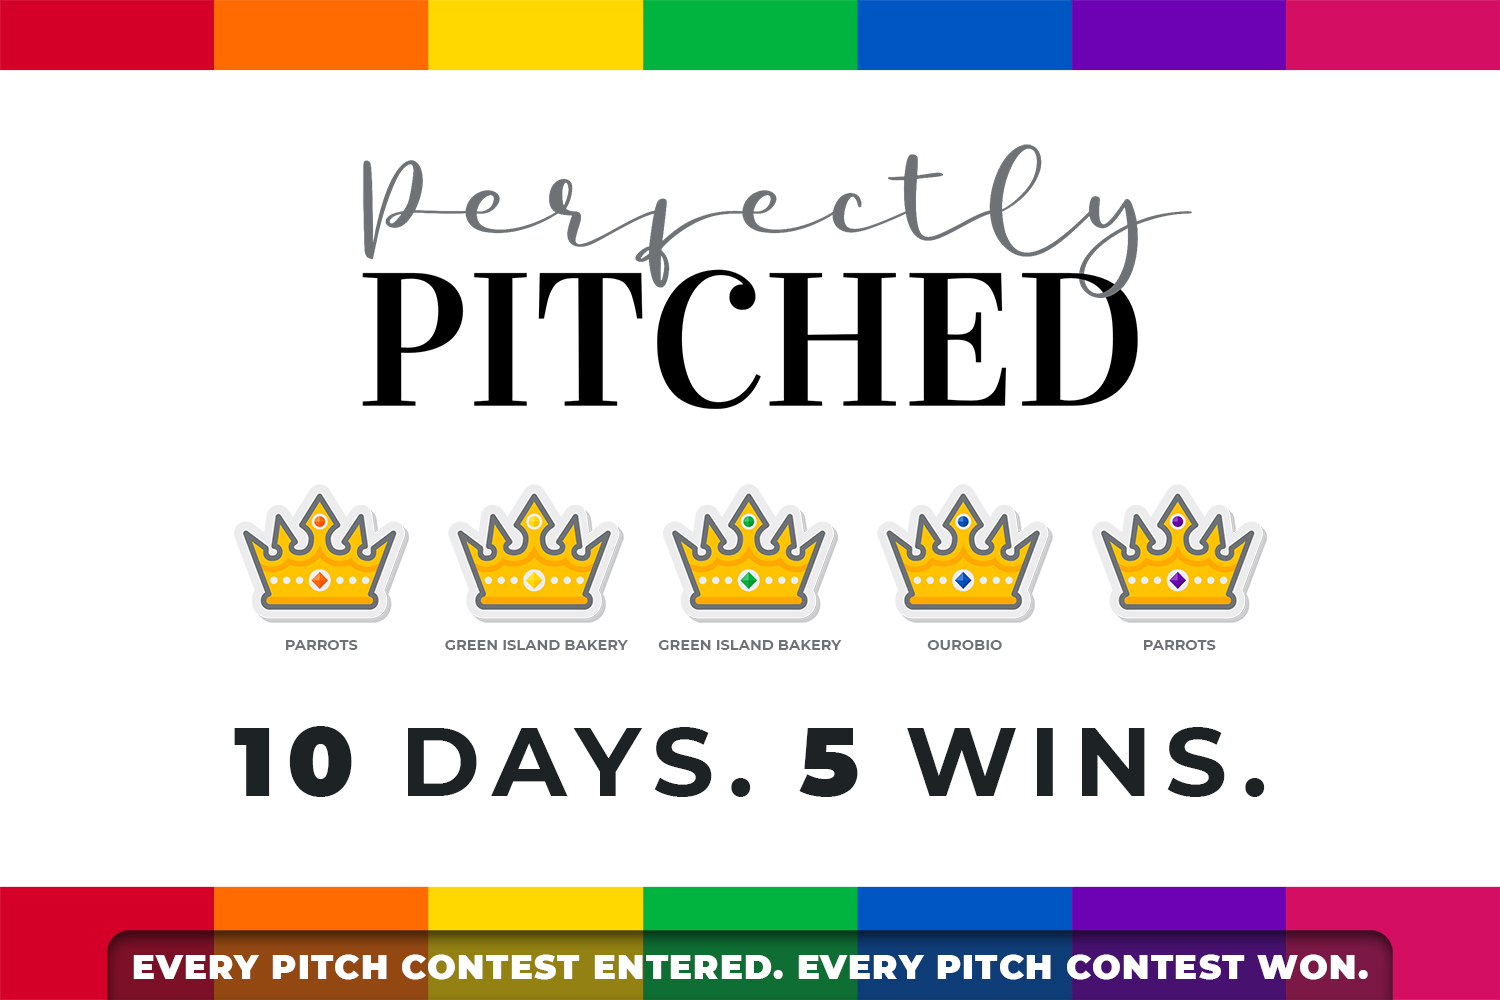 Perfectly Pitched - 10 Days. 5 Wins. Every pitch competition entered. Every pitch competition won. (Image also includes 5 adorable decorative crowns, each one labeled with the client that won it - Parrots, Green Island Bakery took two prizes, OuroBio, and Parrots again!)